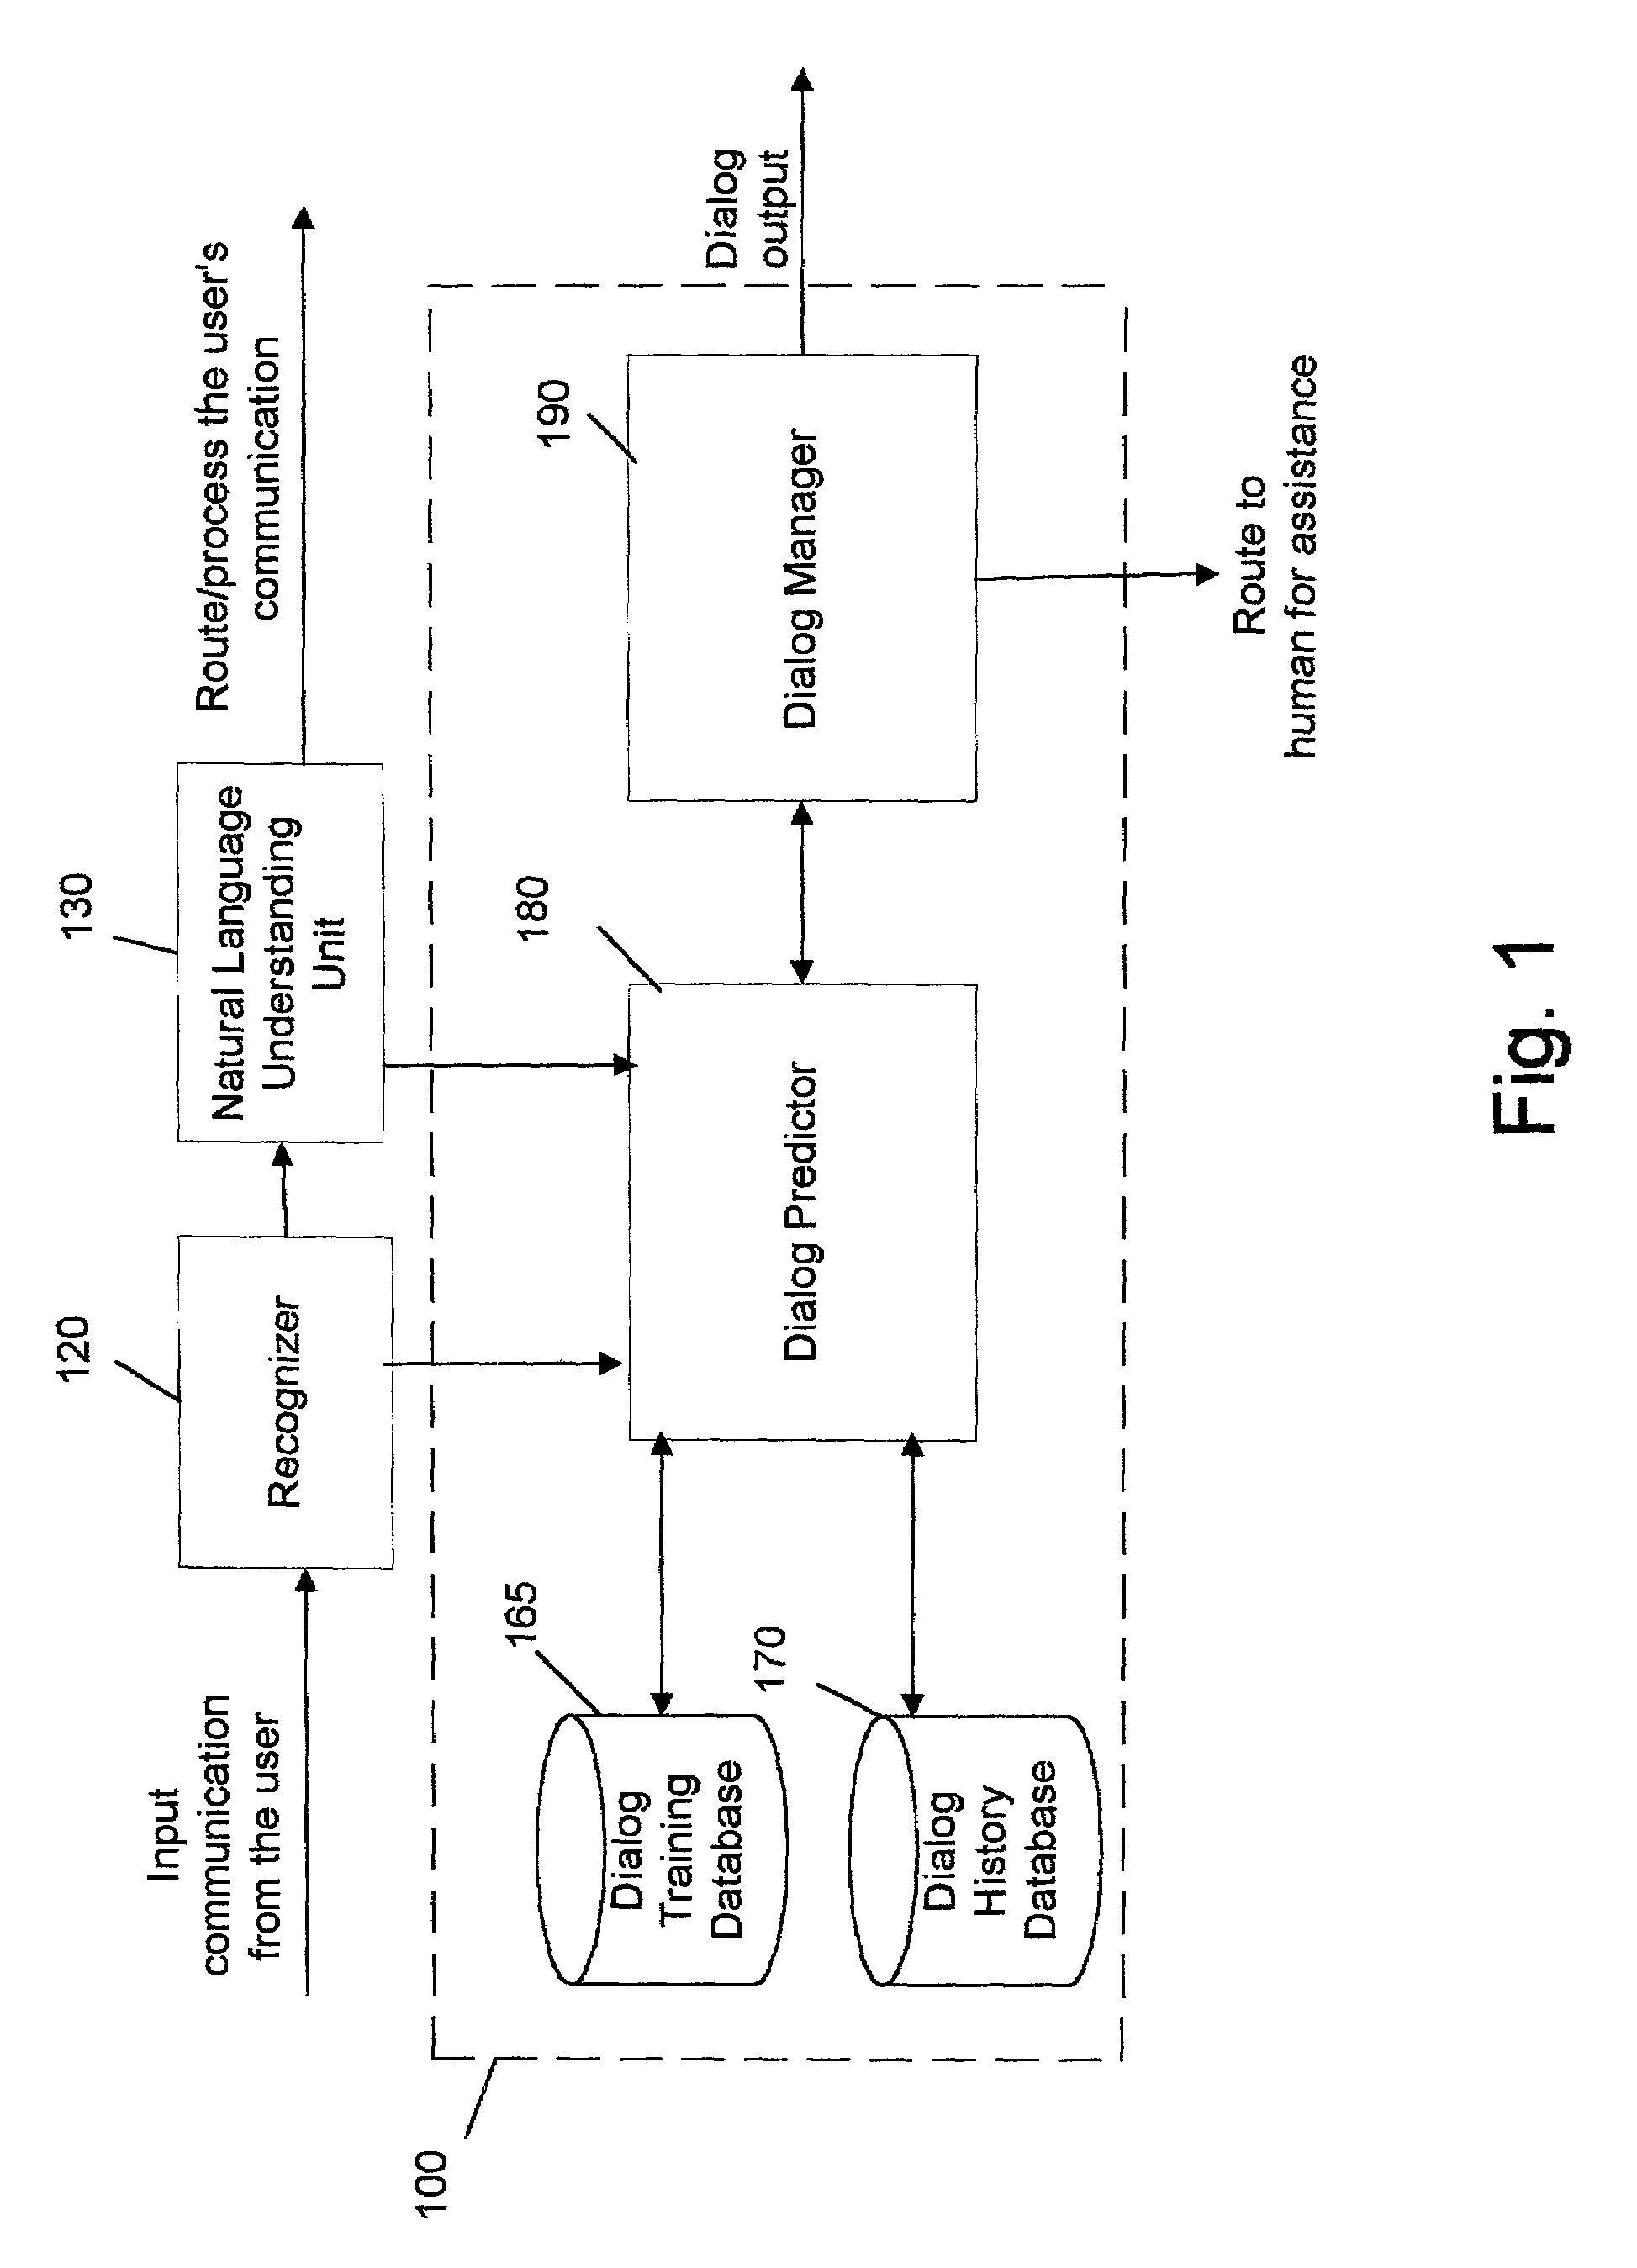 Method and system for predicting problematic dialog situations in a task classification system